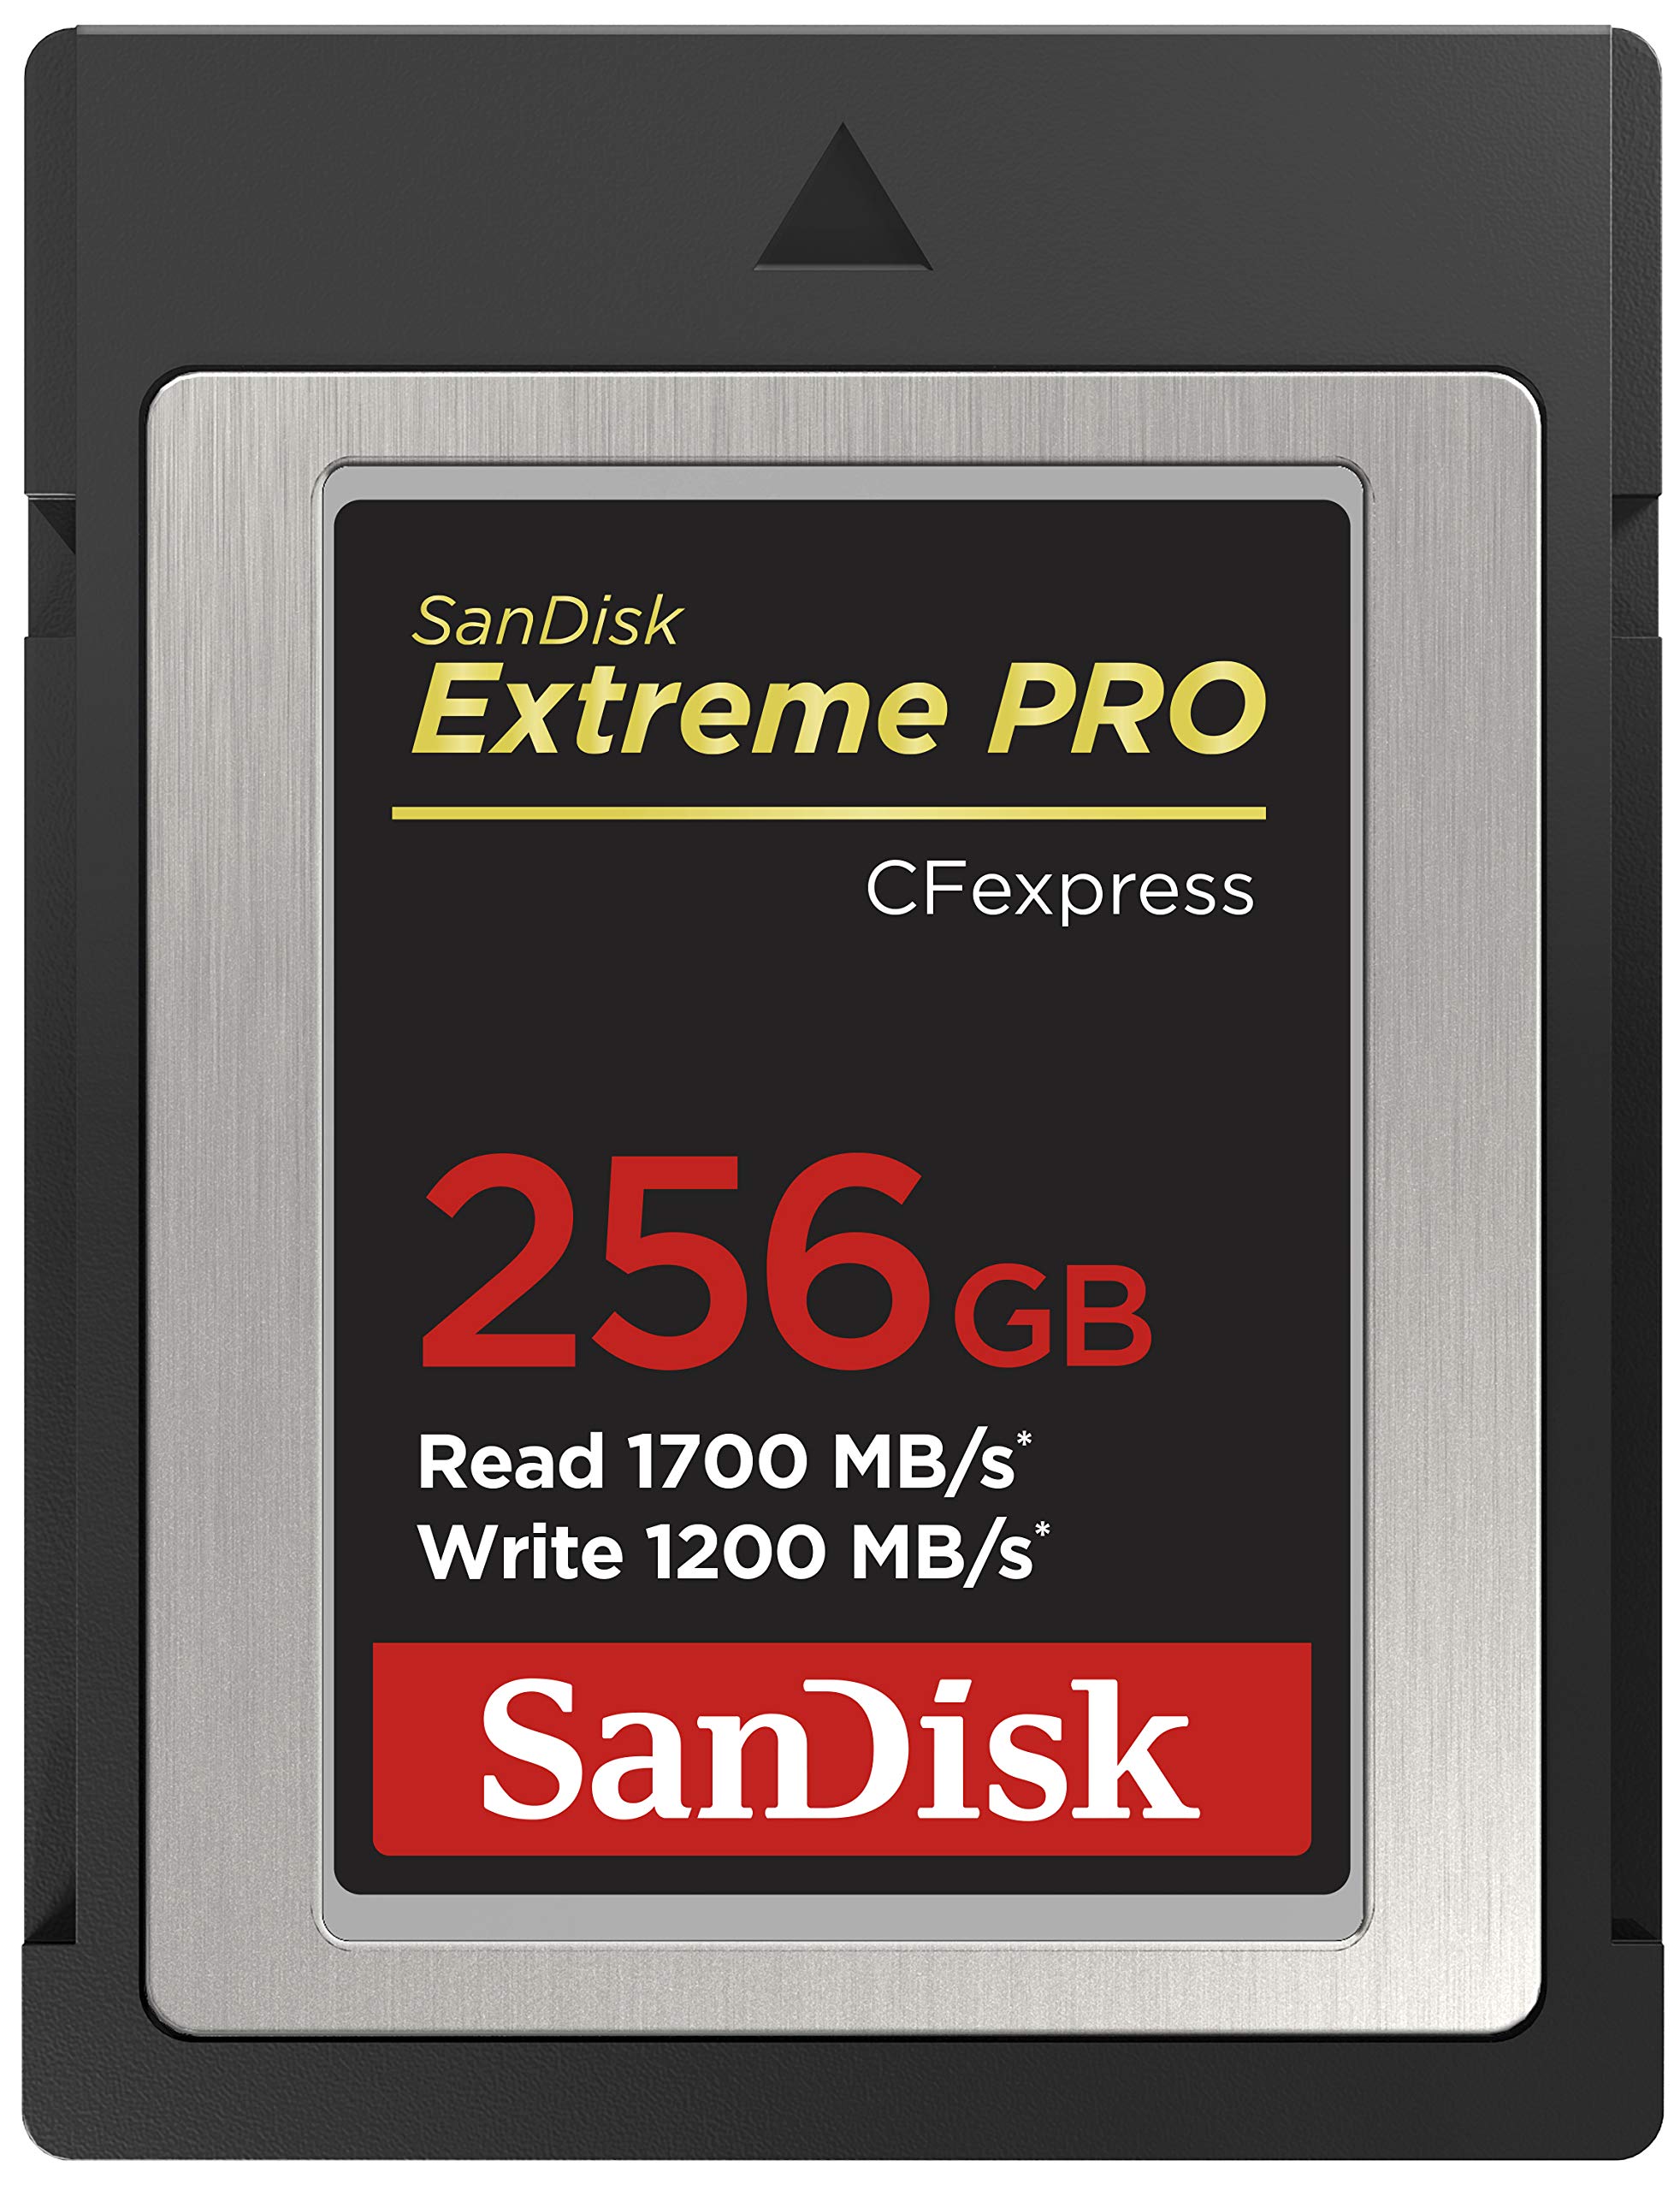 SDCFEXPRESS 256GB EXTREME PRO